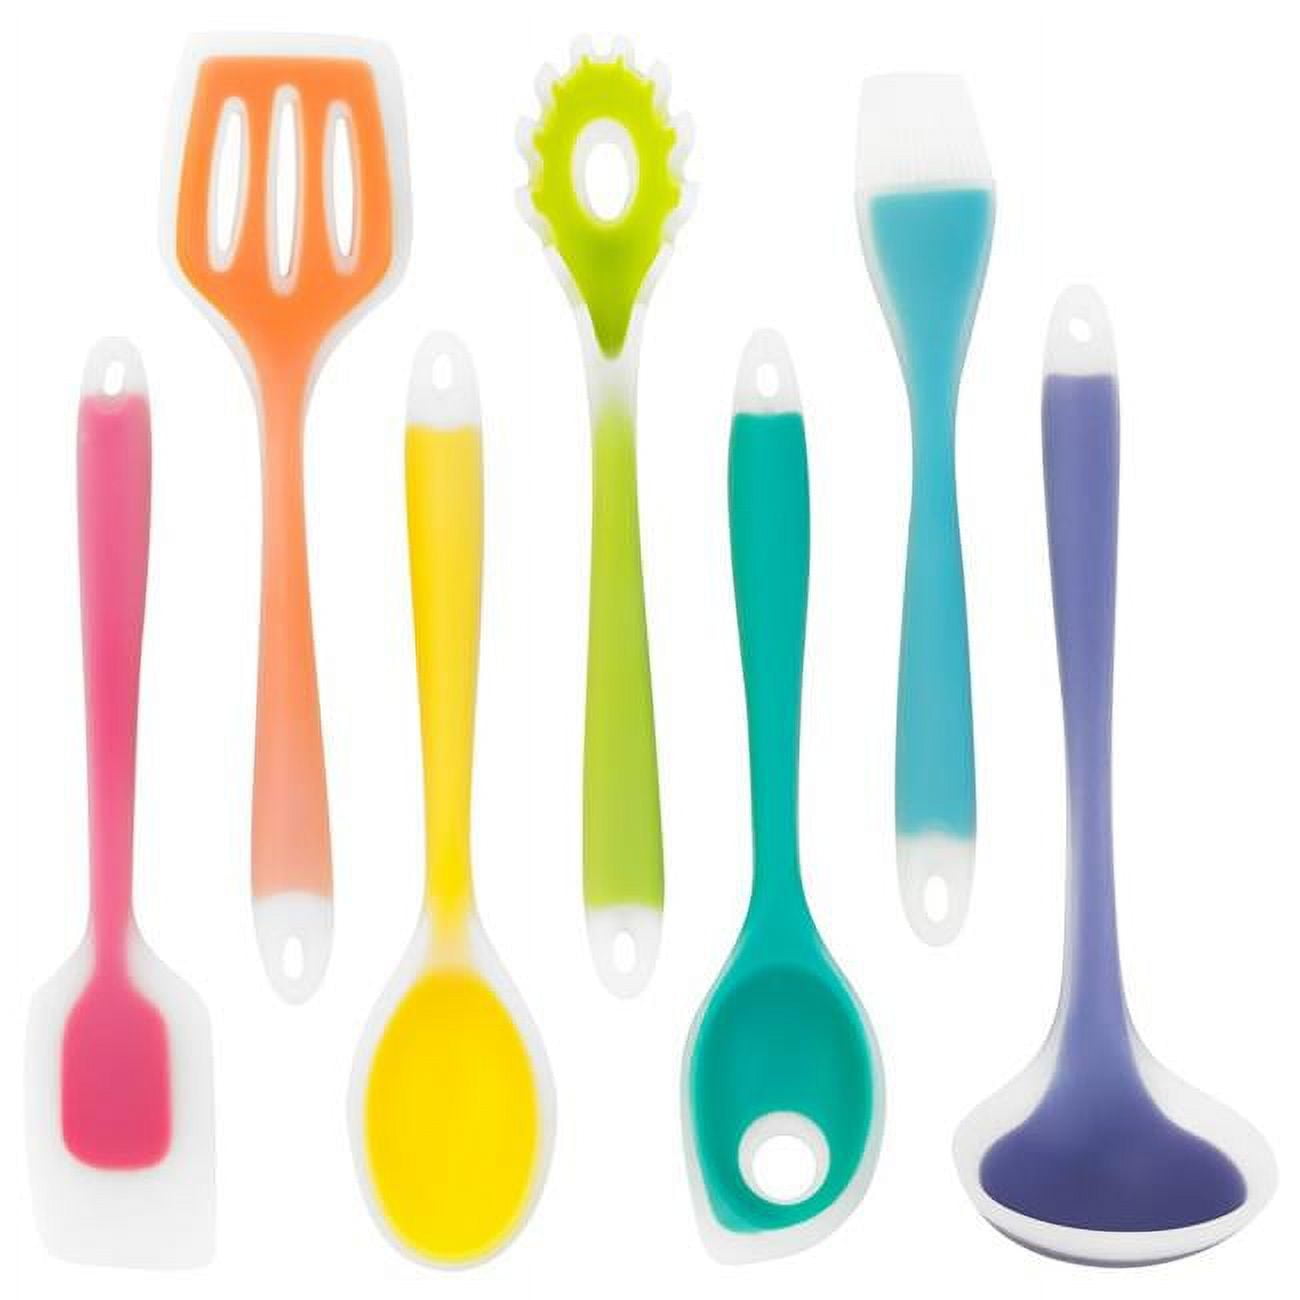 Picture of Brybelly KUTN-001 Silicone Utensil Set - Pack of 7